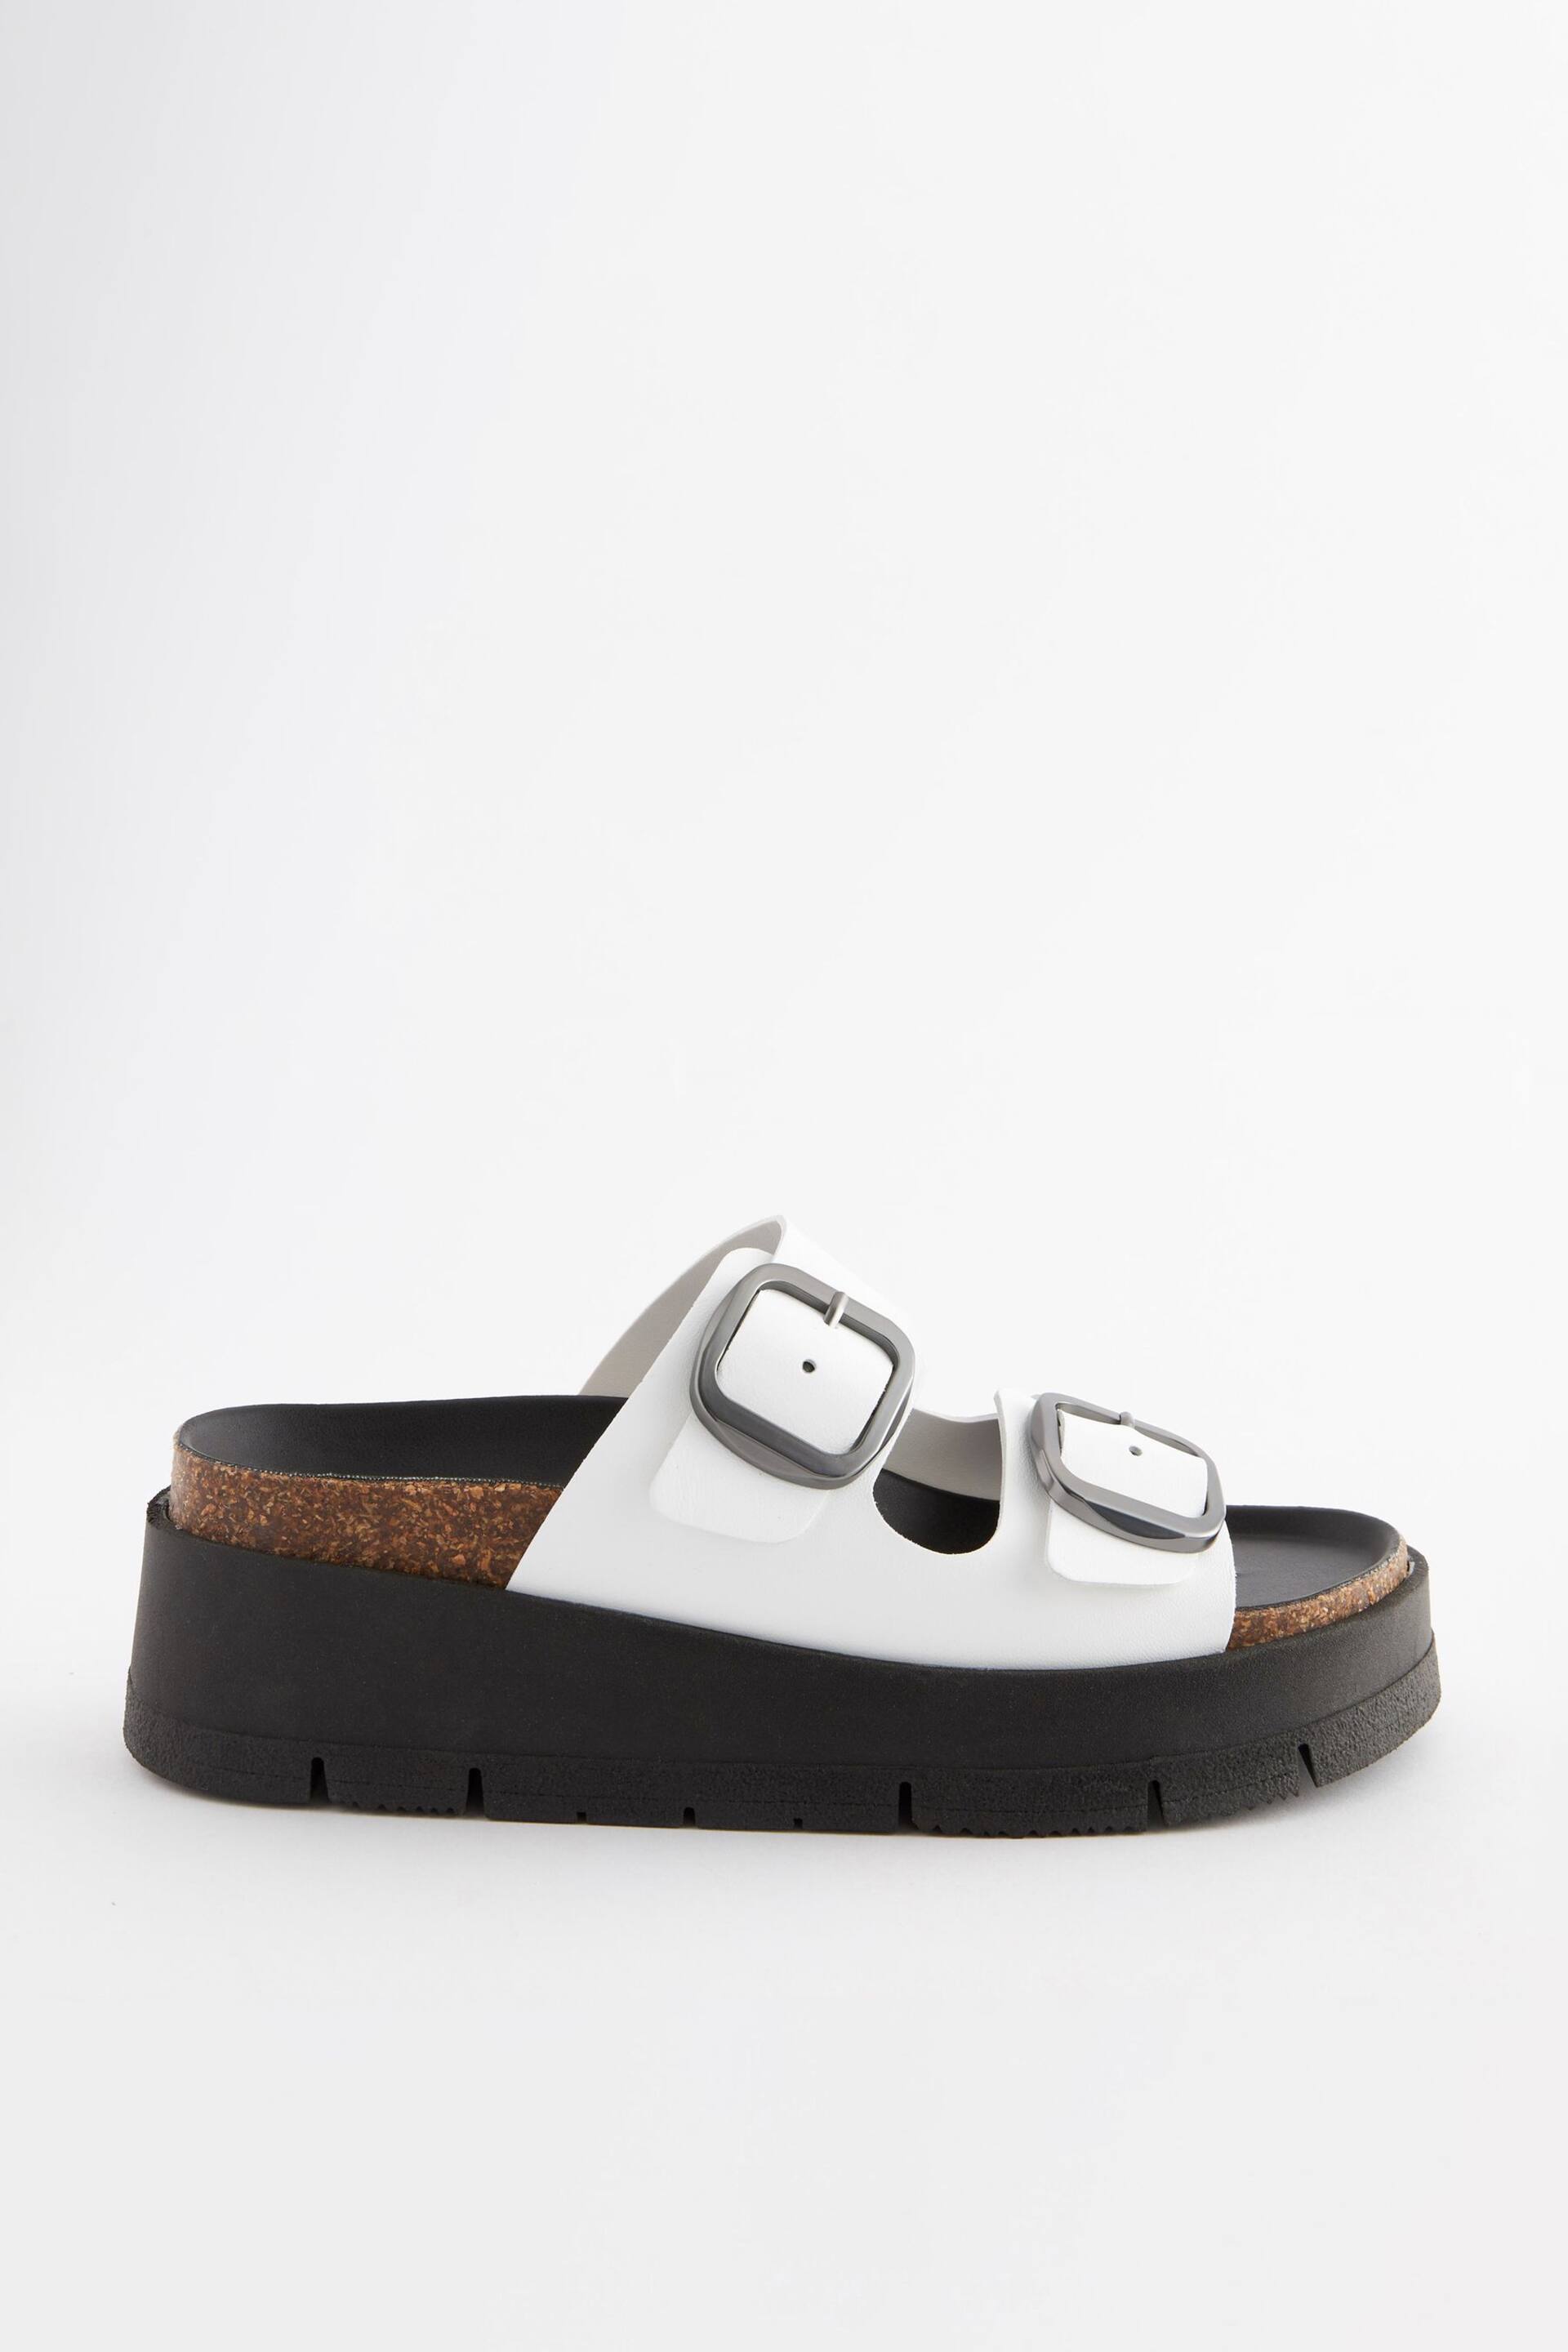 White Forever Comfort® Leather Double Buckle Flatform Sandals - Image 4 of 7